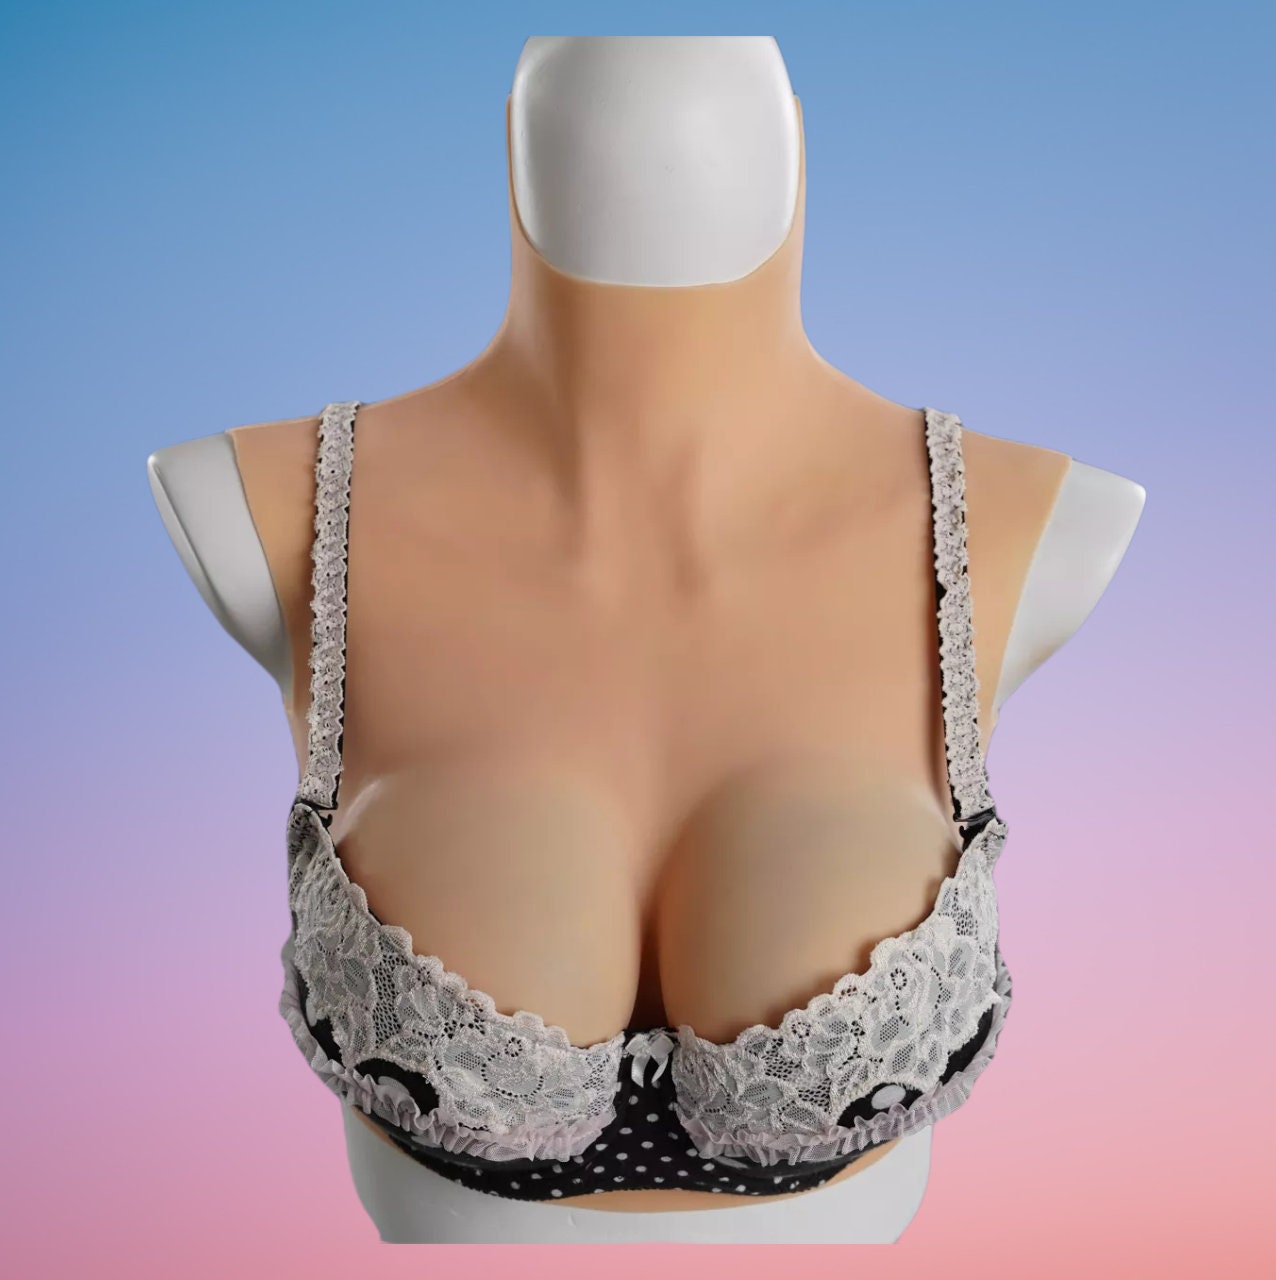 Pair Soft Silicone Breast Forms Fake Boobs Prosthetic Breast Forms For Evening High Quality